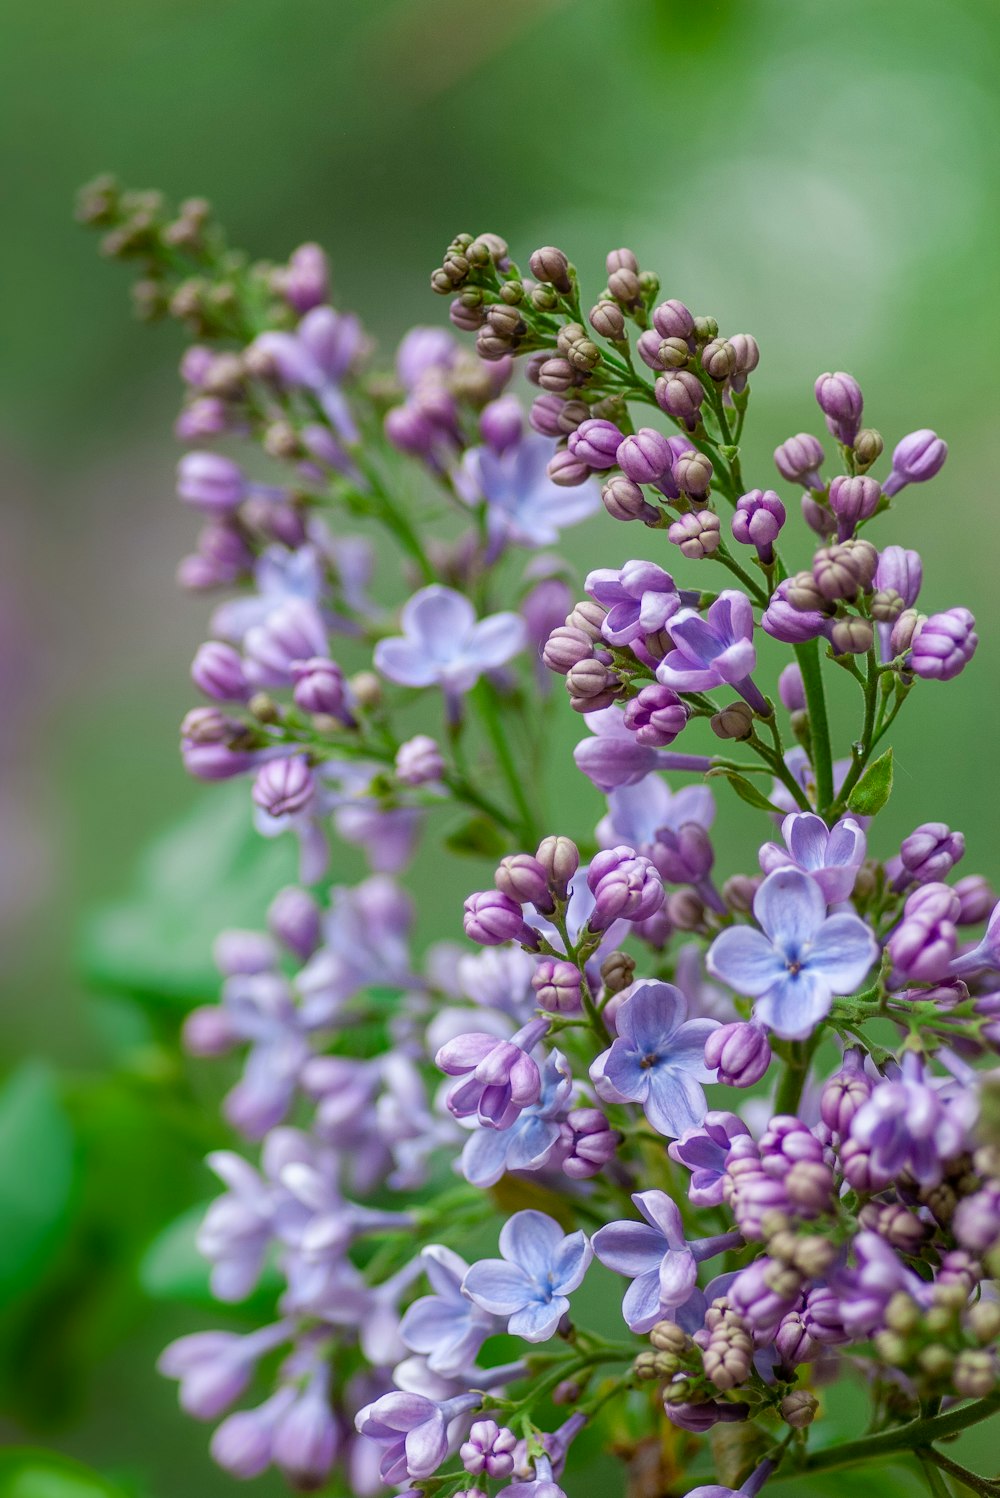 bokeh photography of green-leafed plant with purple and blue flowers